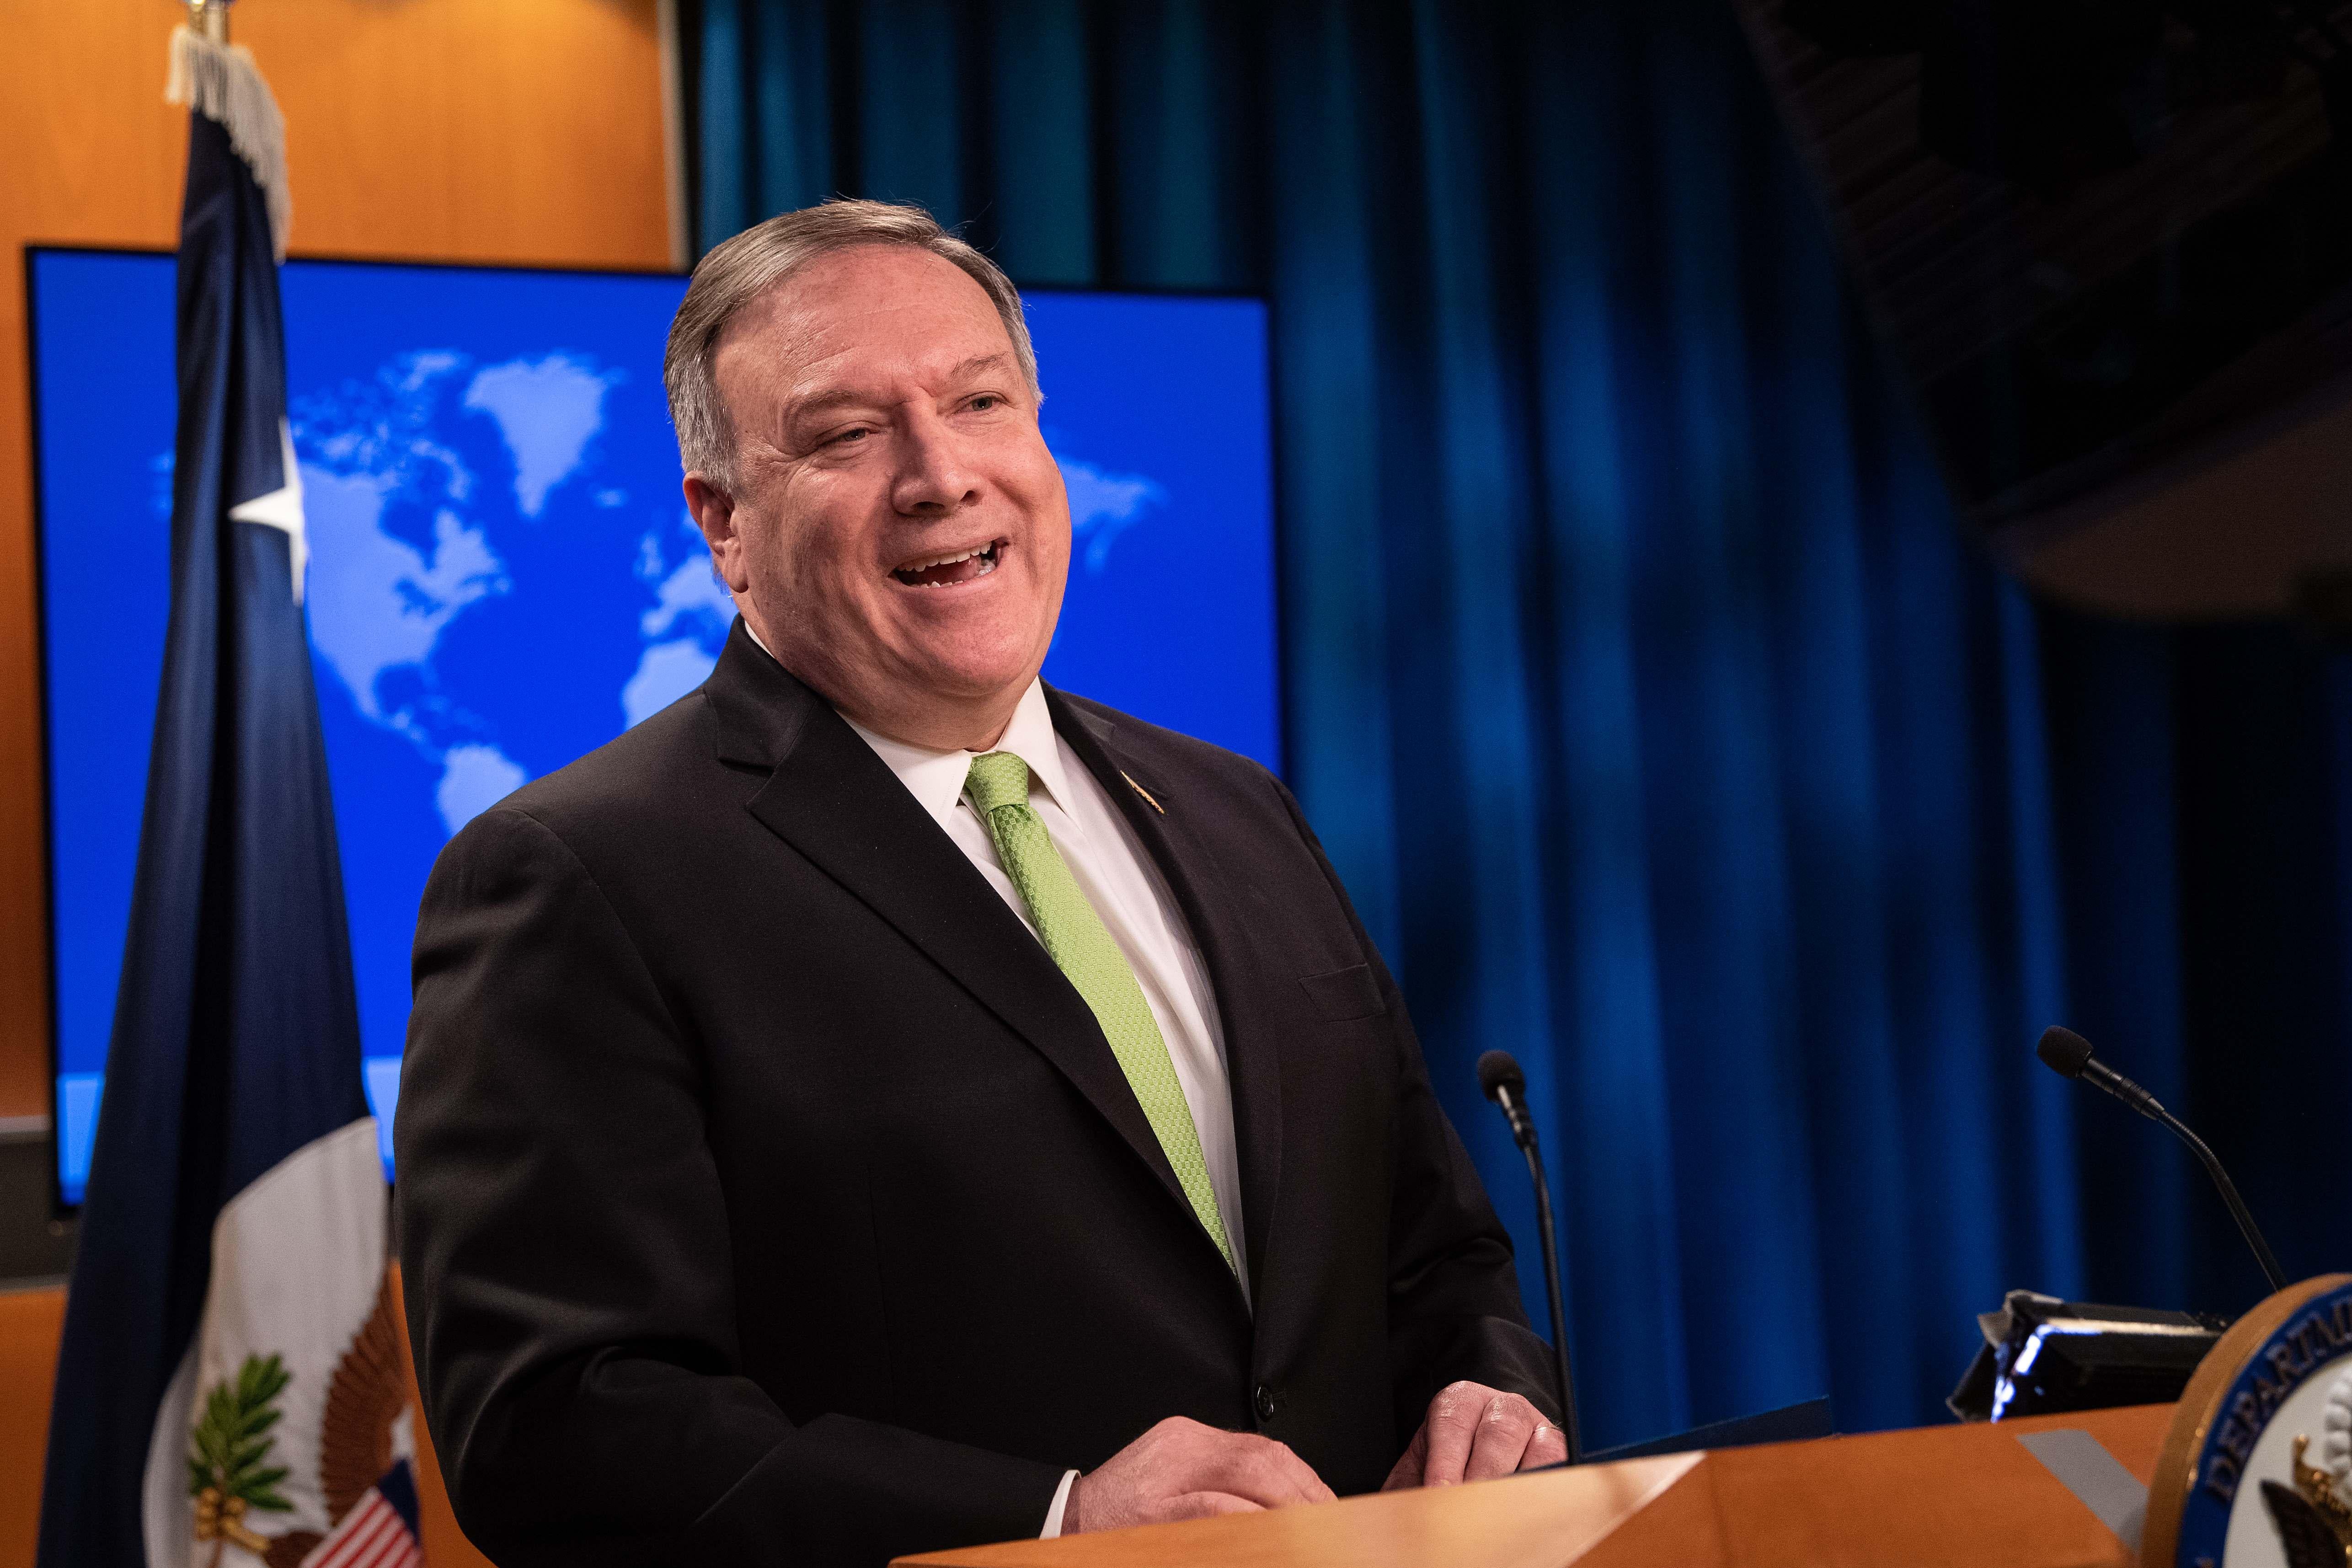 Pompeo speaks at a lectern